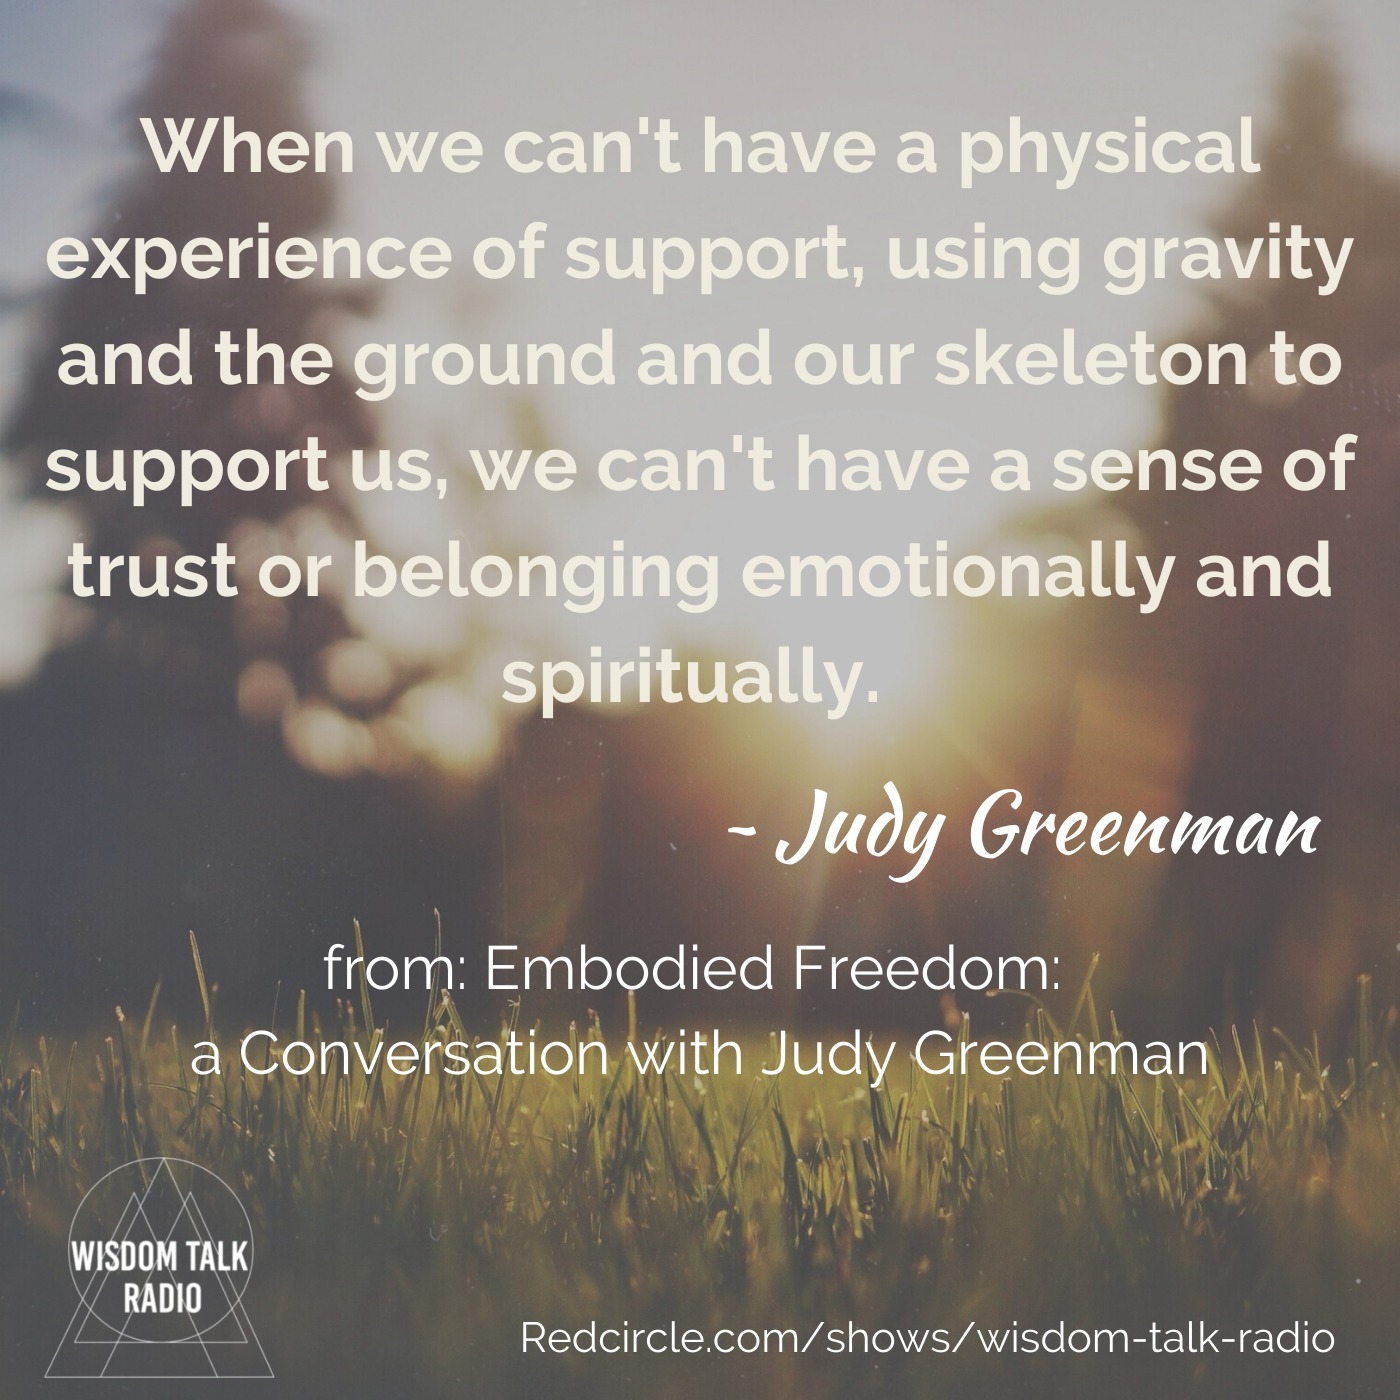 Embodied Freedom: A Conversation with Judy Greenman